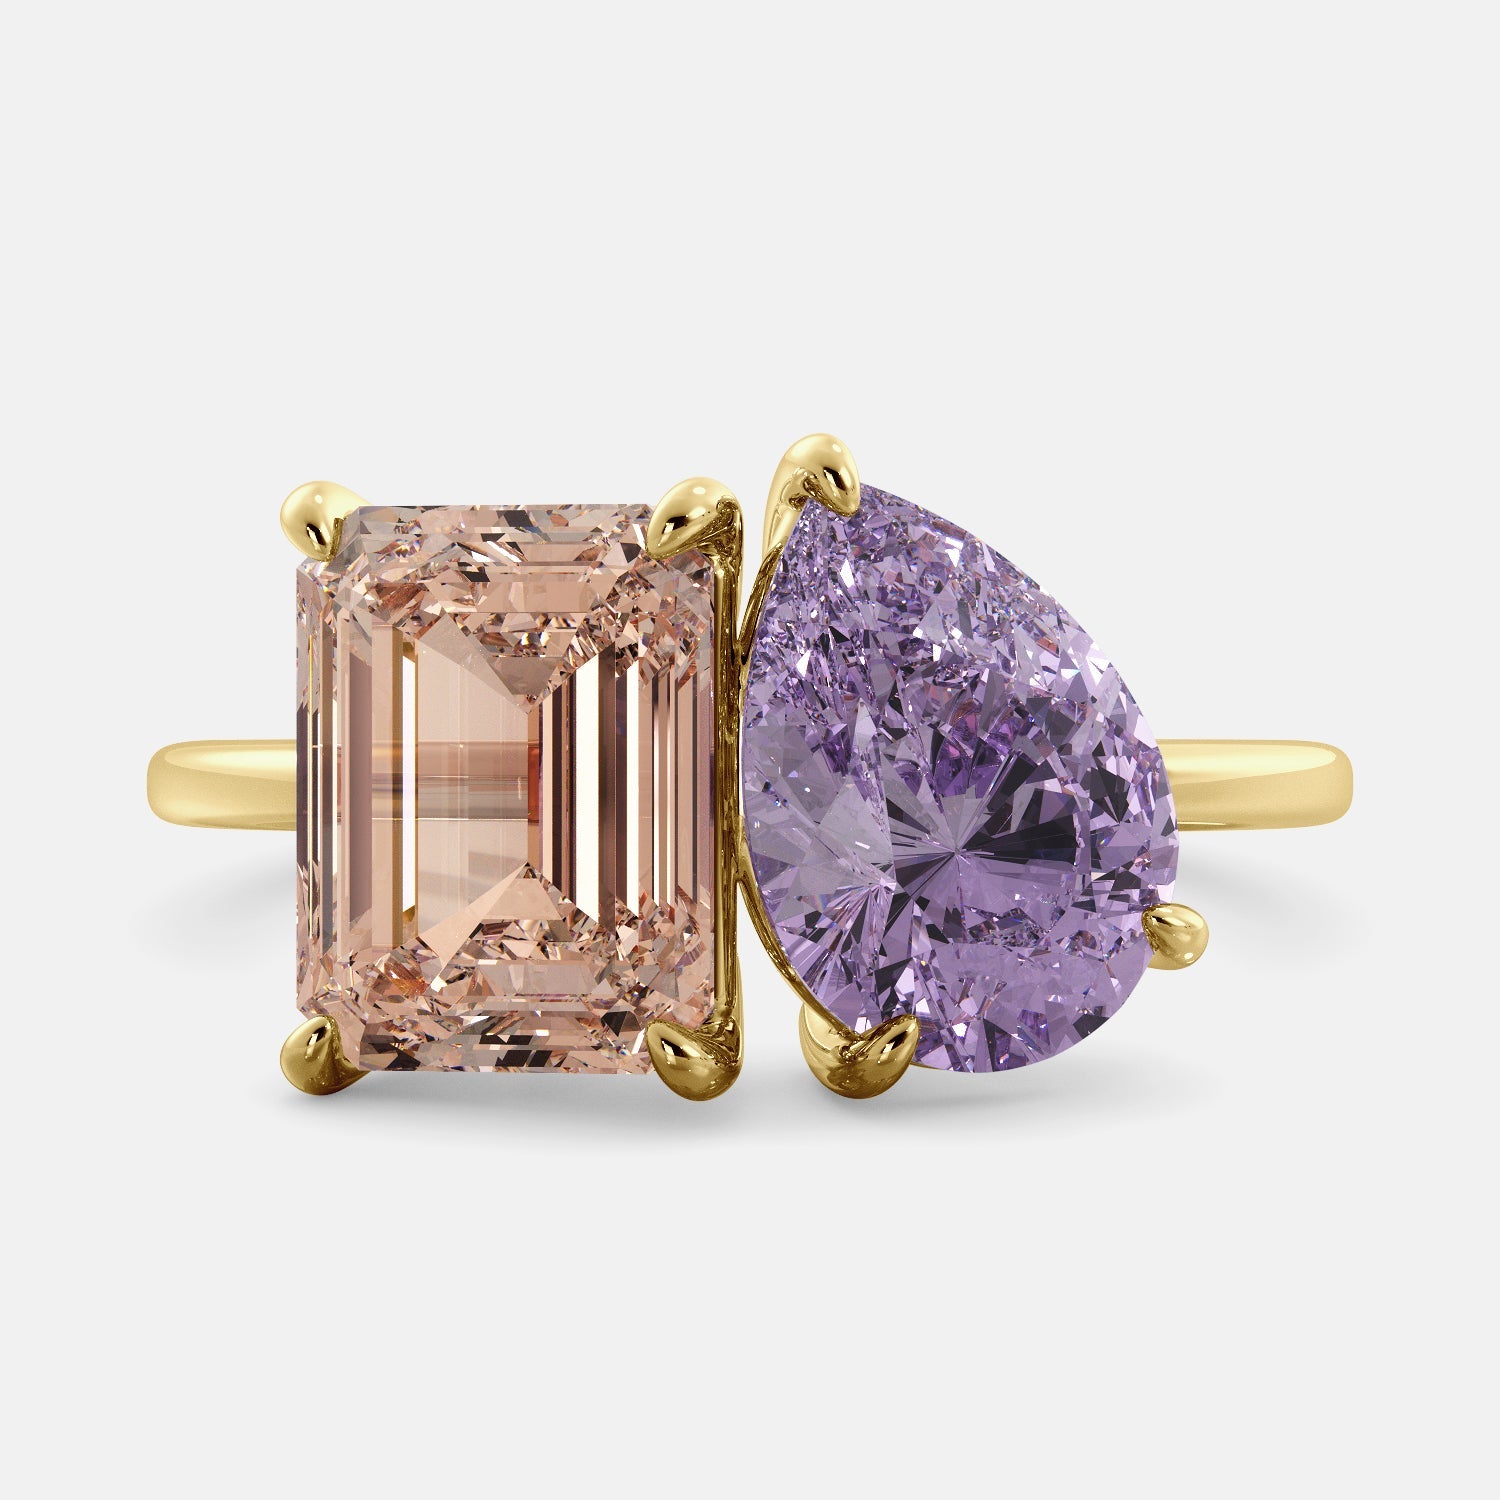 A toi et moi ring with a pear-shaped amethyst and an emerald-cut morganite. The ring is set in a 14k yellow gold band and is available in all sizes. The morganite is a pink gemstone that is said to promote love, compassion, and forgiveness. The amethyst is a purple gemstone that is said to promote peace, love, and harmony. The toi et moi ring is a beautiful and unique way to show your love and commitment to someone special.